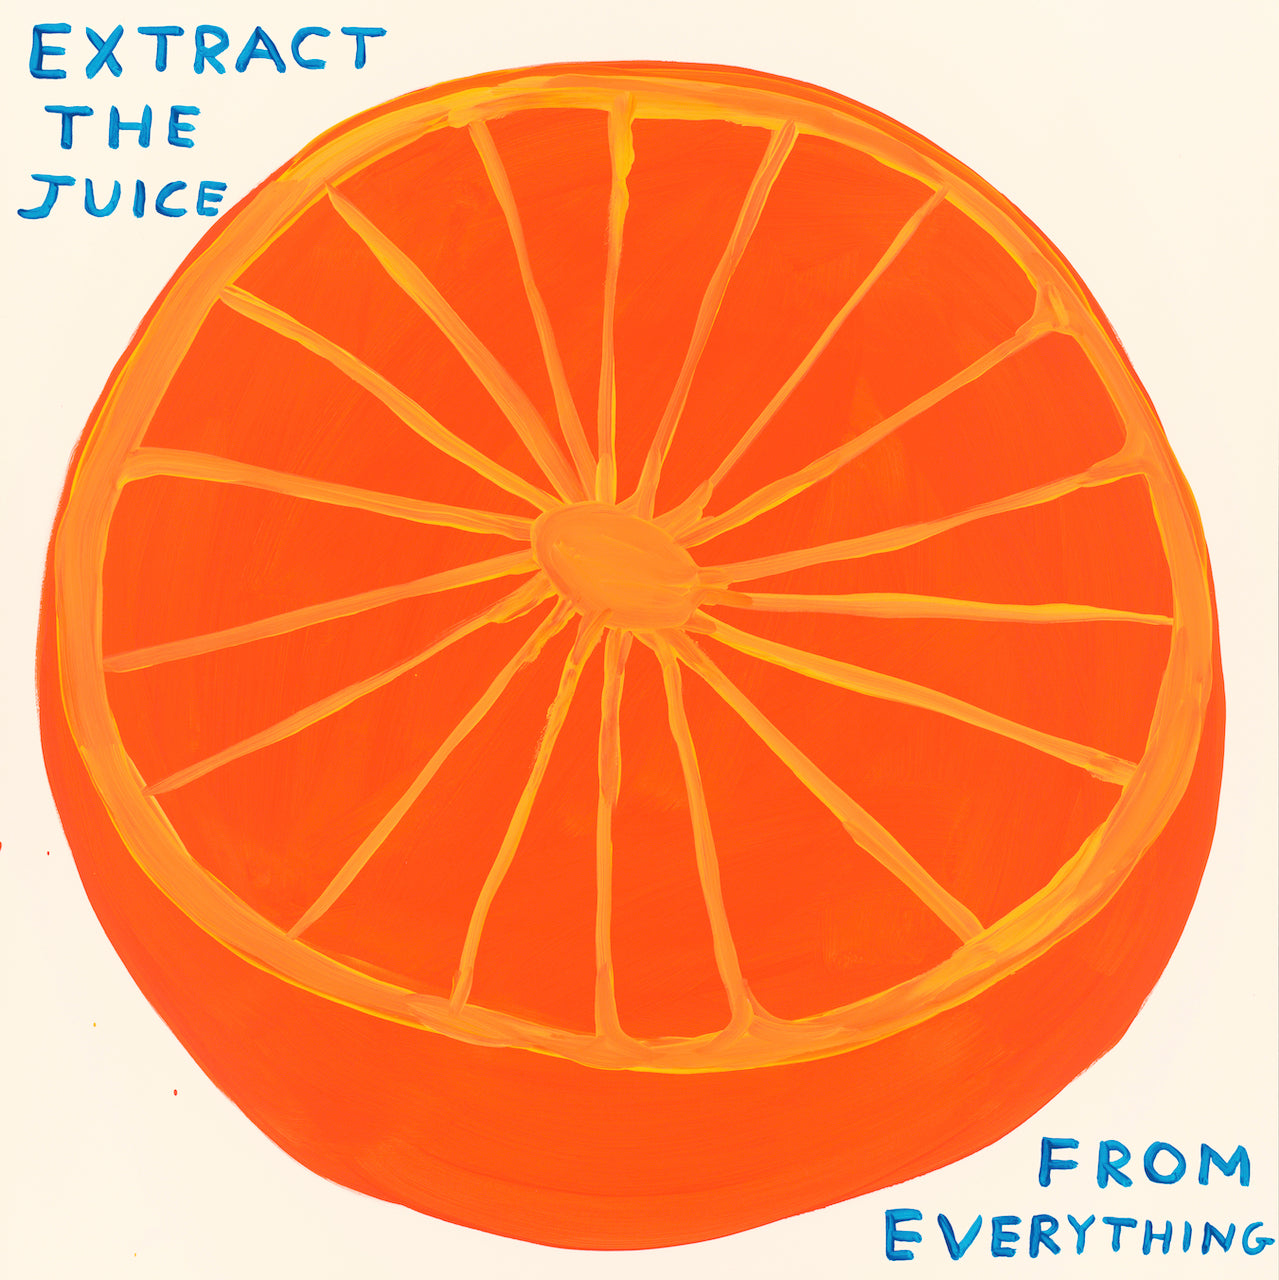 Extract The Juice, 2023 by David Shrigley is a limited edition, 12 colour screenprint with a varnish overlay. Discover the full collection of available artworks at Jealous. Purchase online or explore more prints on the gallery website.